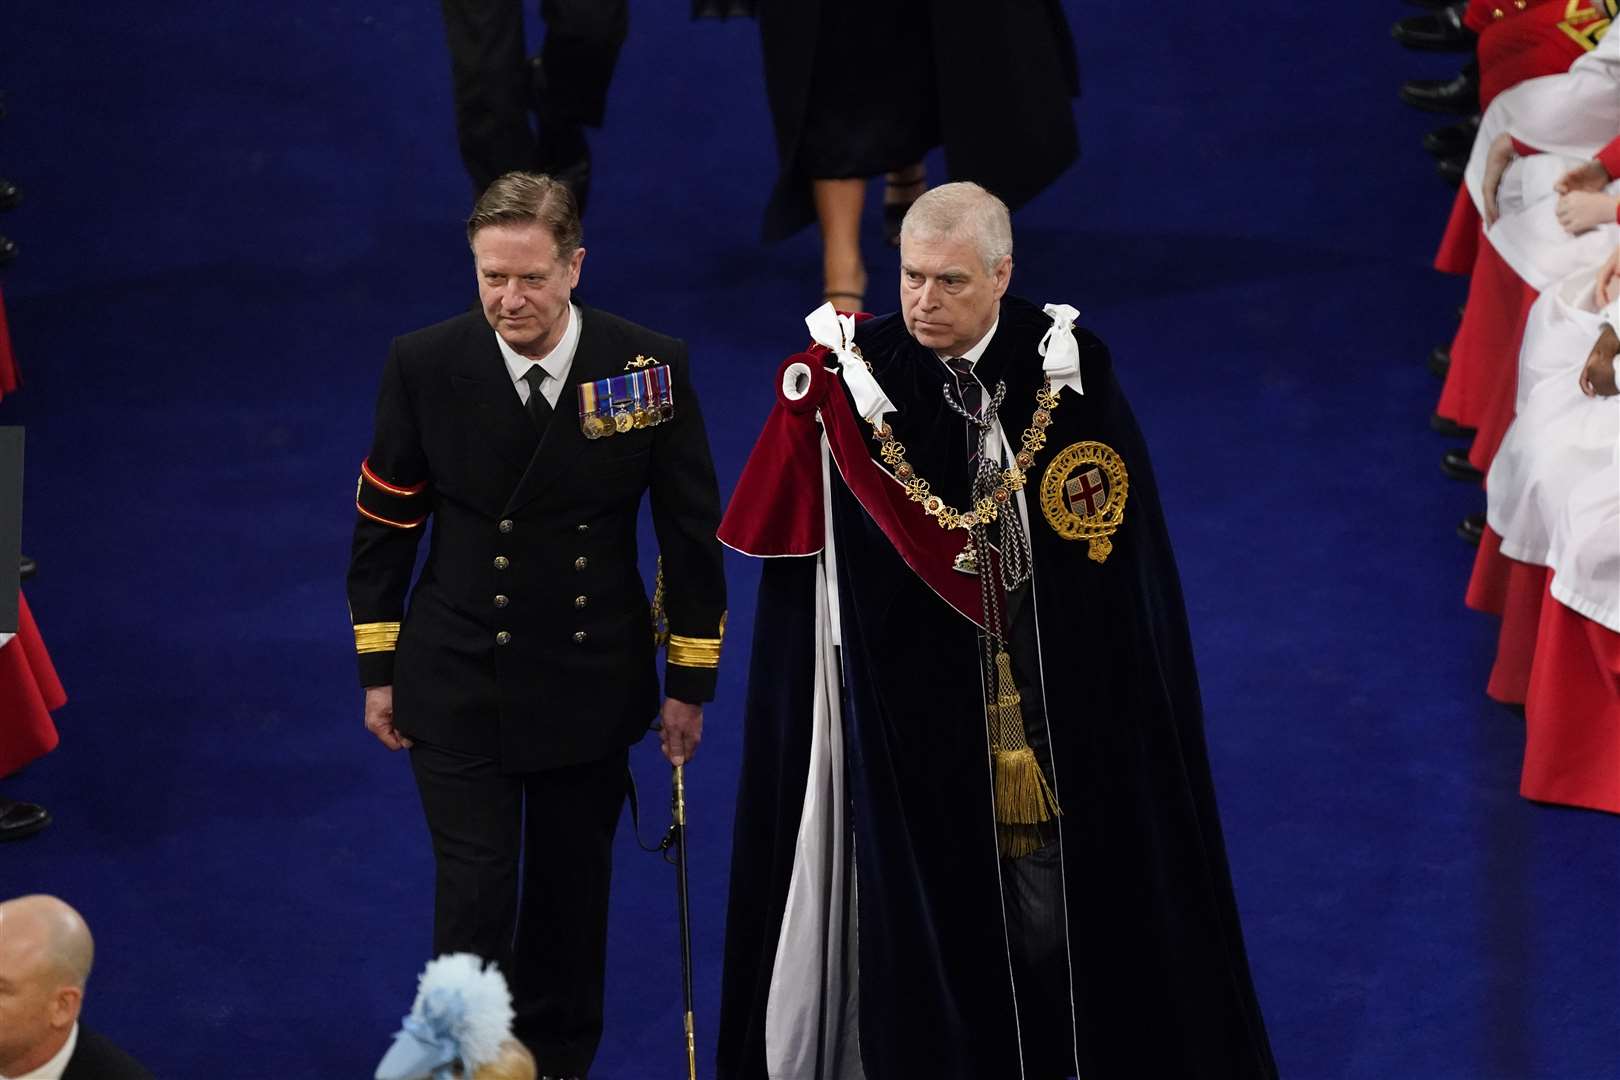 The Duke of York at the the King’s coronation (Andrew Matthews/PA)